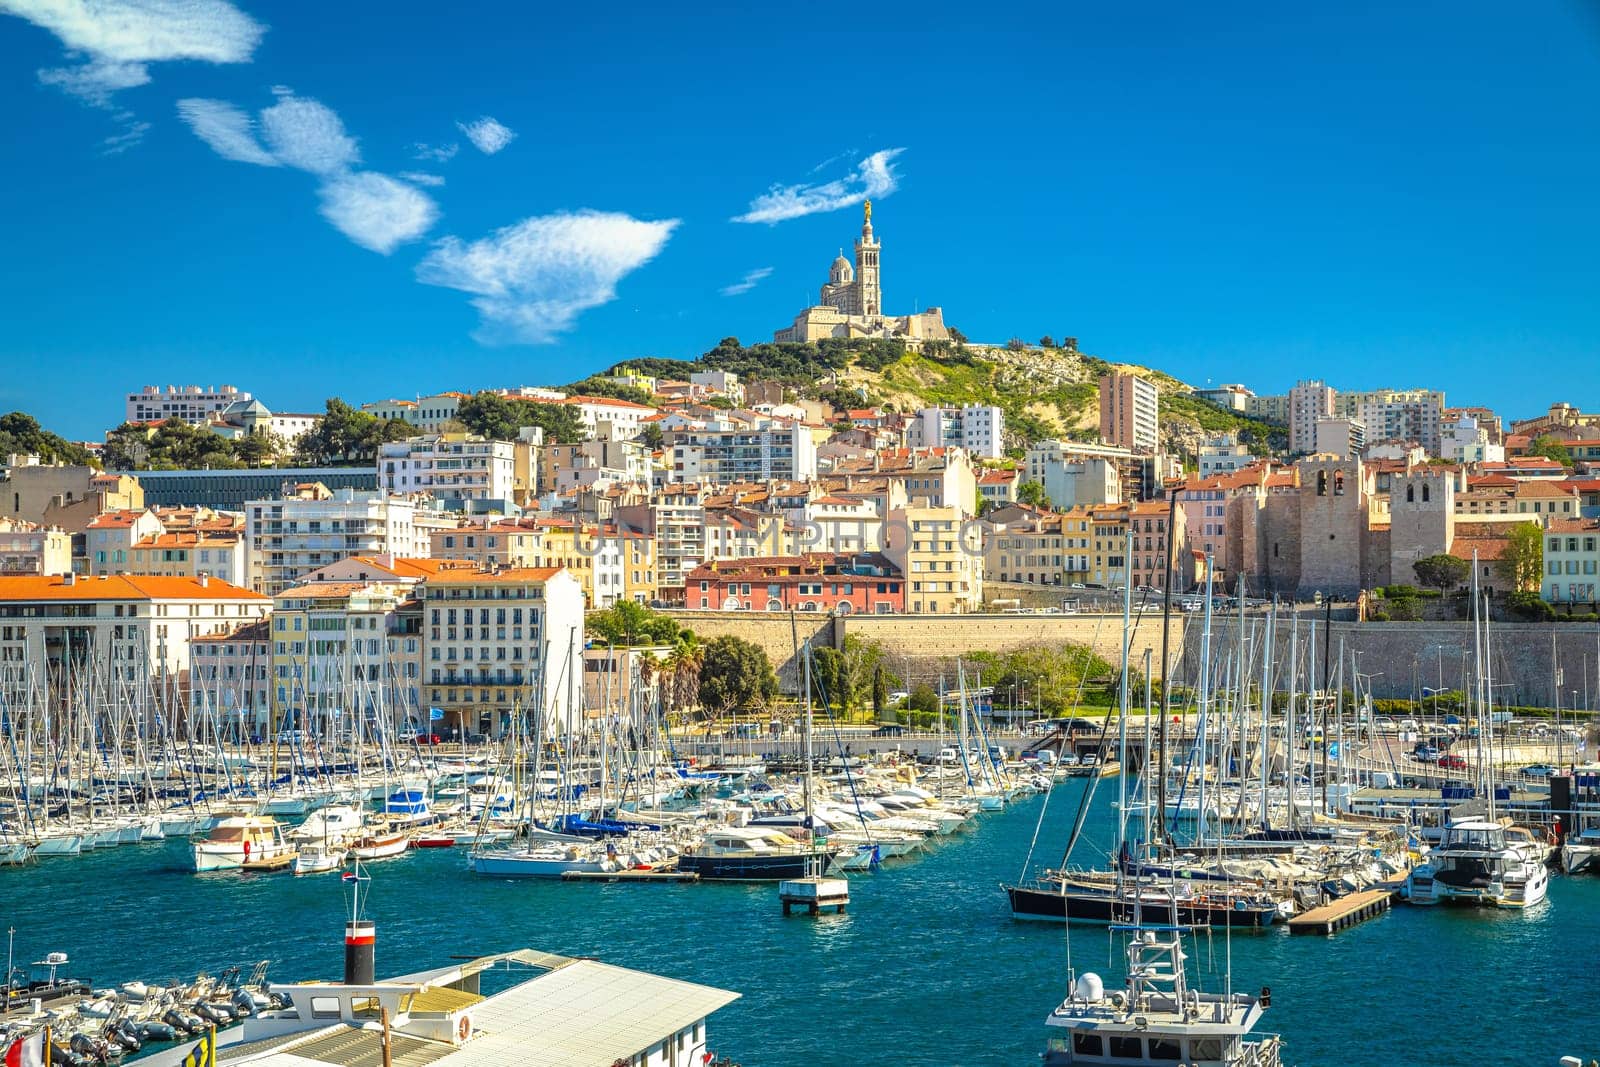 City of Marseille harbor and Notre Dame de la Garde church on the hill view by xbrchx